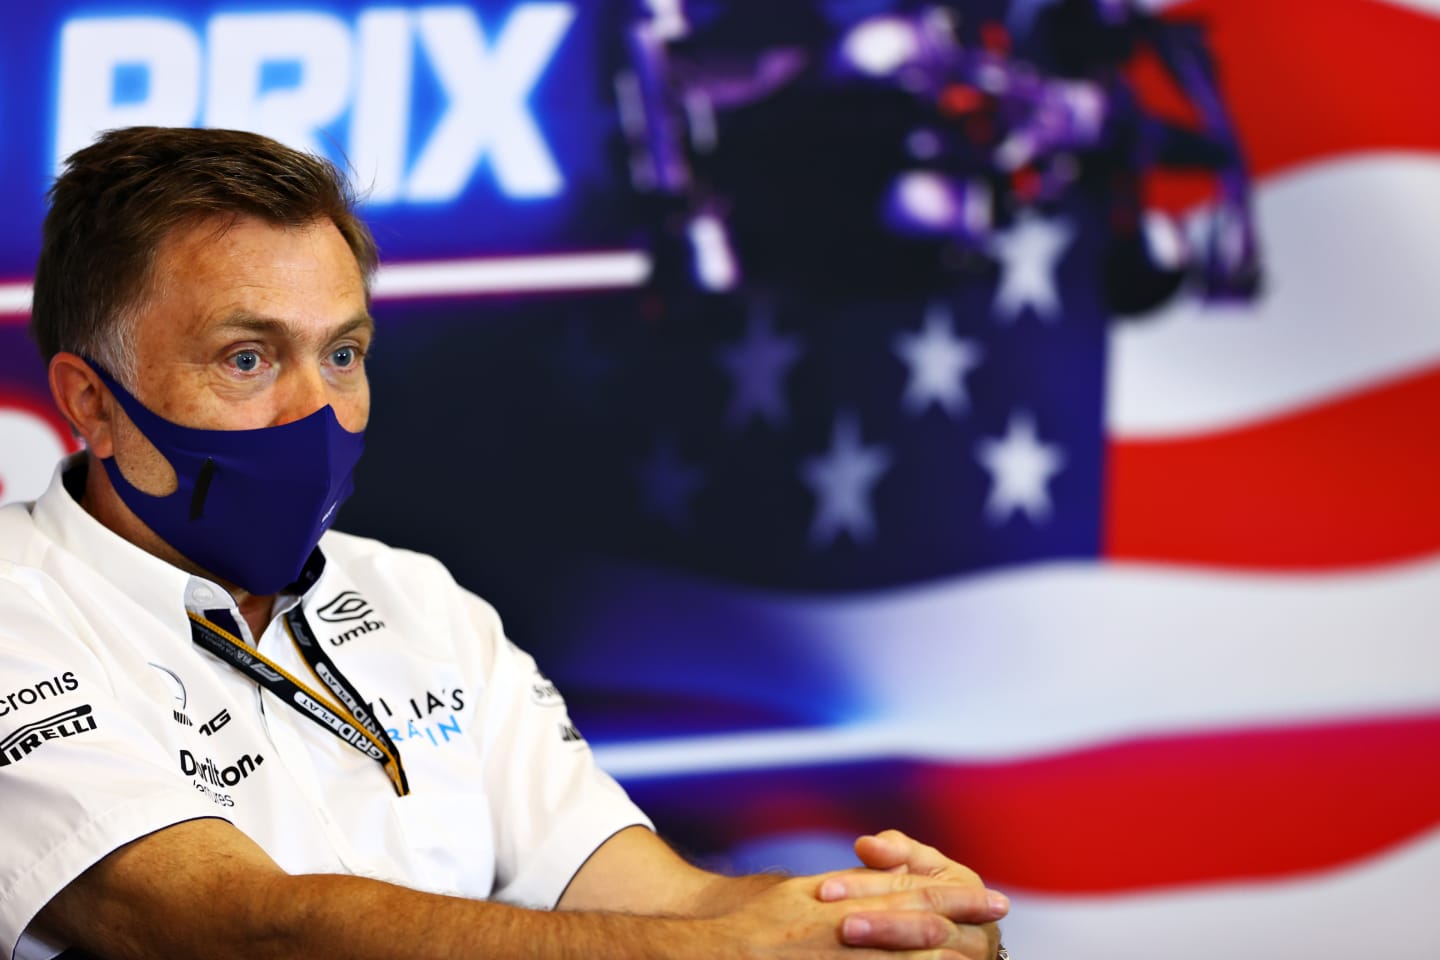 AUSTIN, TEXAS - OCTOBER 22: Jost Capito, CEO of Williams F1 talks in the Team Principals Press Conference during practice ahead of the F1 Grand Prix of USA at Circuit of The Americas on October 22, 2021 in Austin, Texas. (Photo by Dan Istitene/Getty Images)